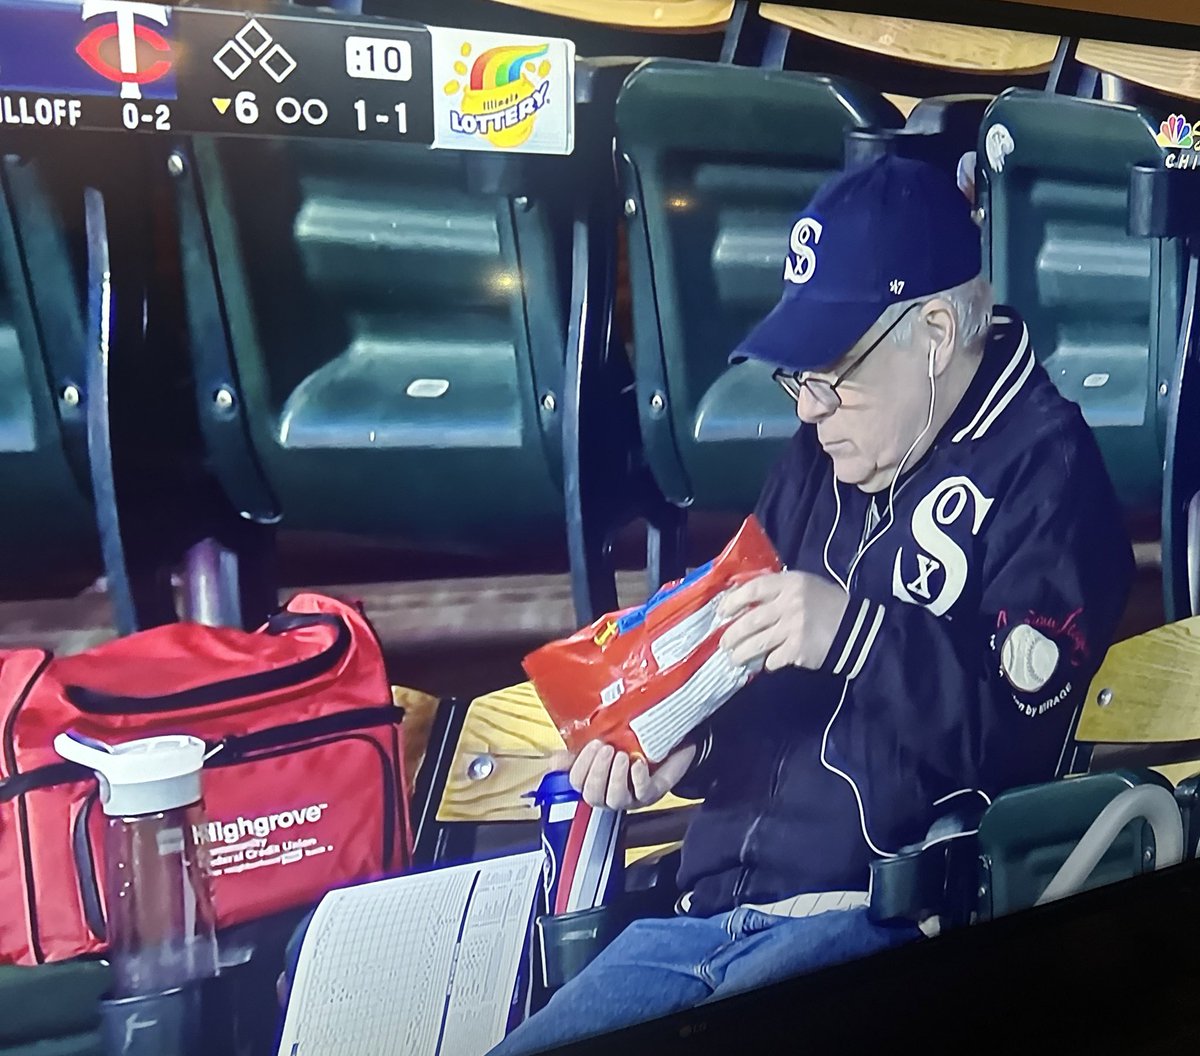 The kind older gentleman in the White Sox jacket sitting alone at the Twins game with headphones on, peanuts, his scorebook, little cooler bag. I want to be his friend.